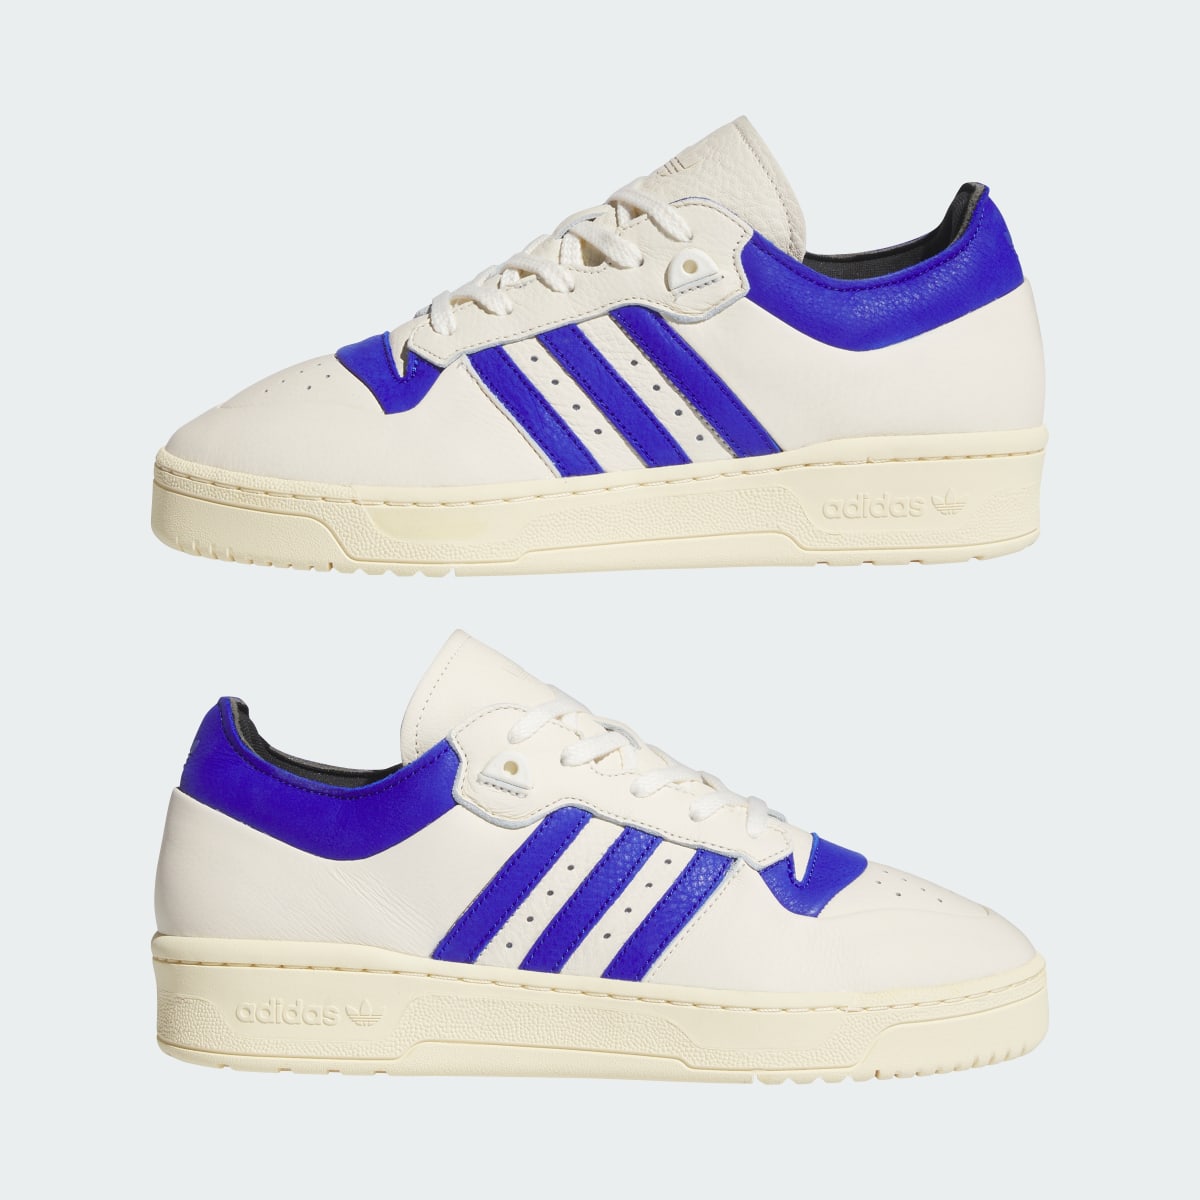 Adidas Rivalry 86 Low Schuh. 8